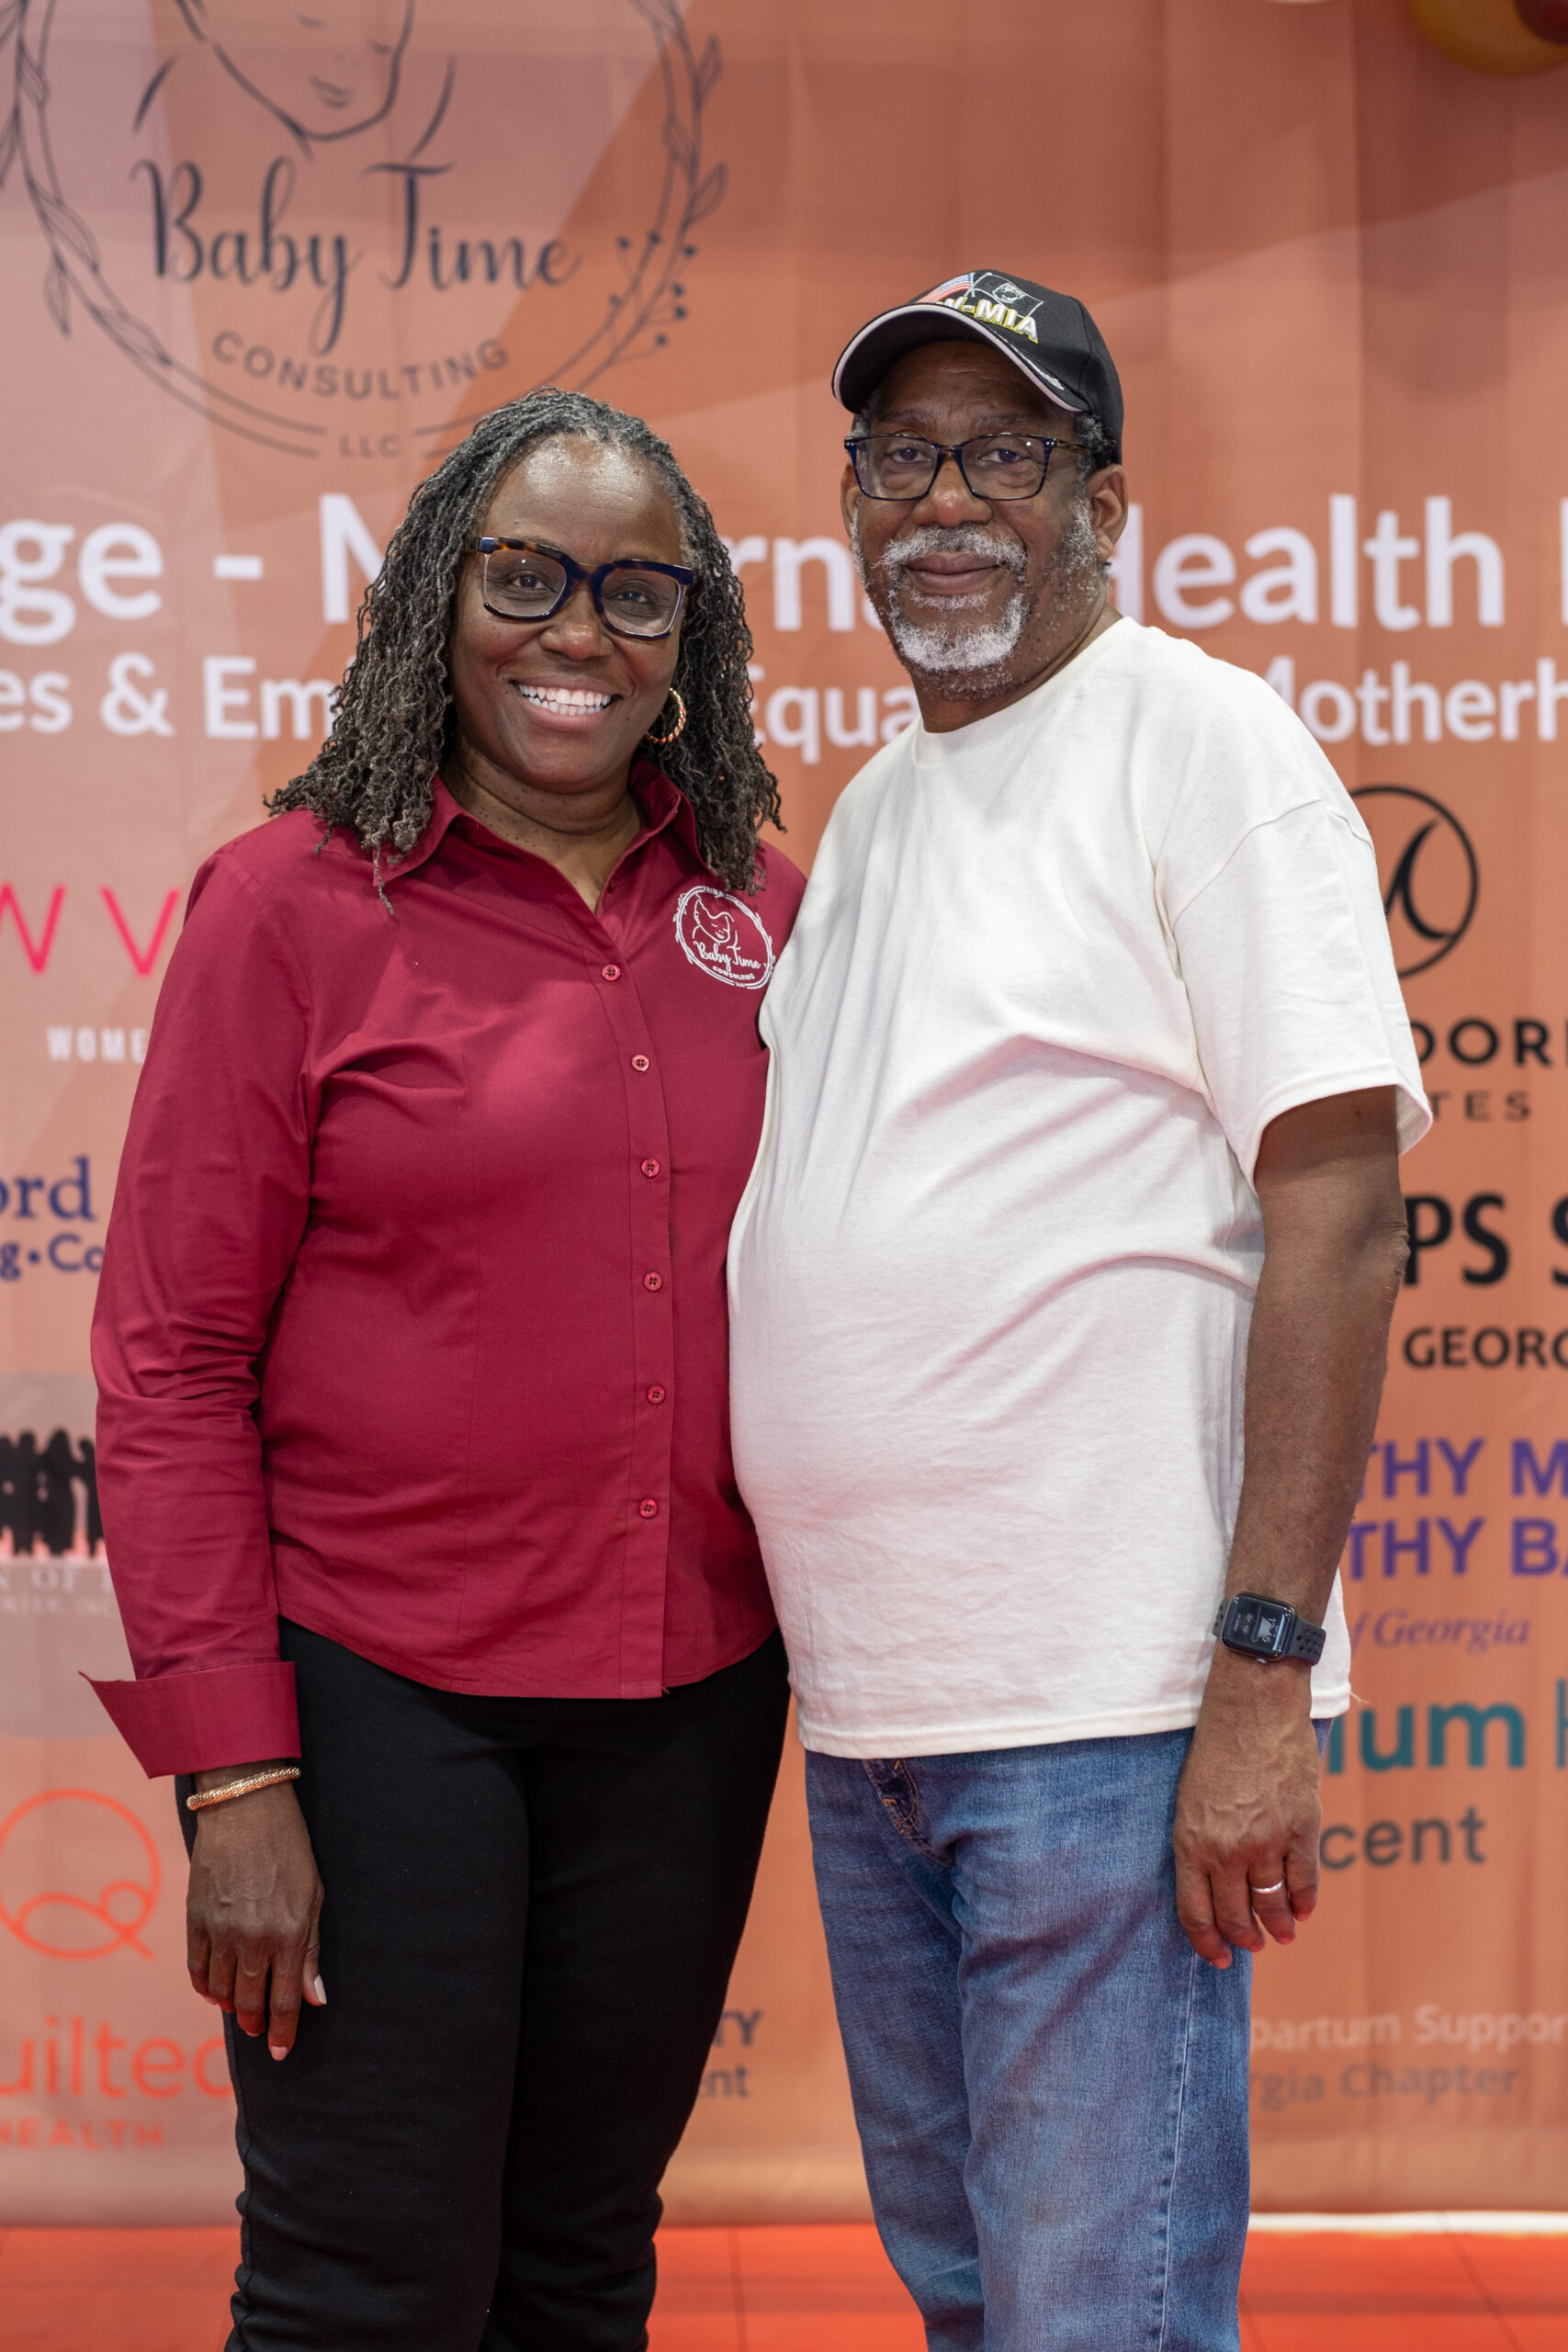 Patricia Prime, owner of Prime BabyTime Consulting, and organizer of the 2nd Annual Maternal Health Expo